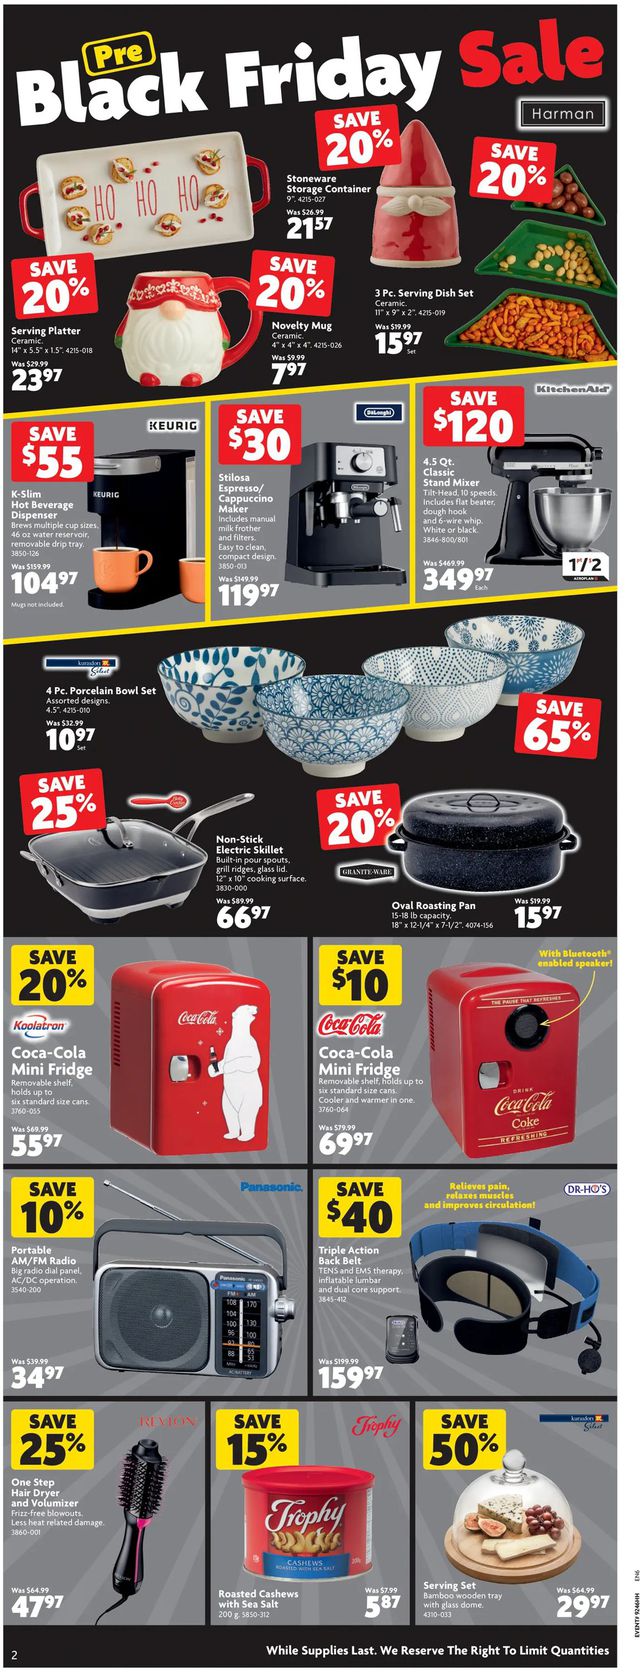 Home Hardware Flyer from 11/18/2021